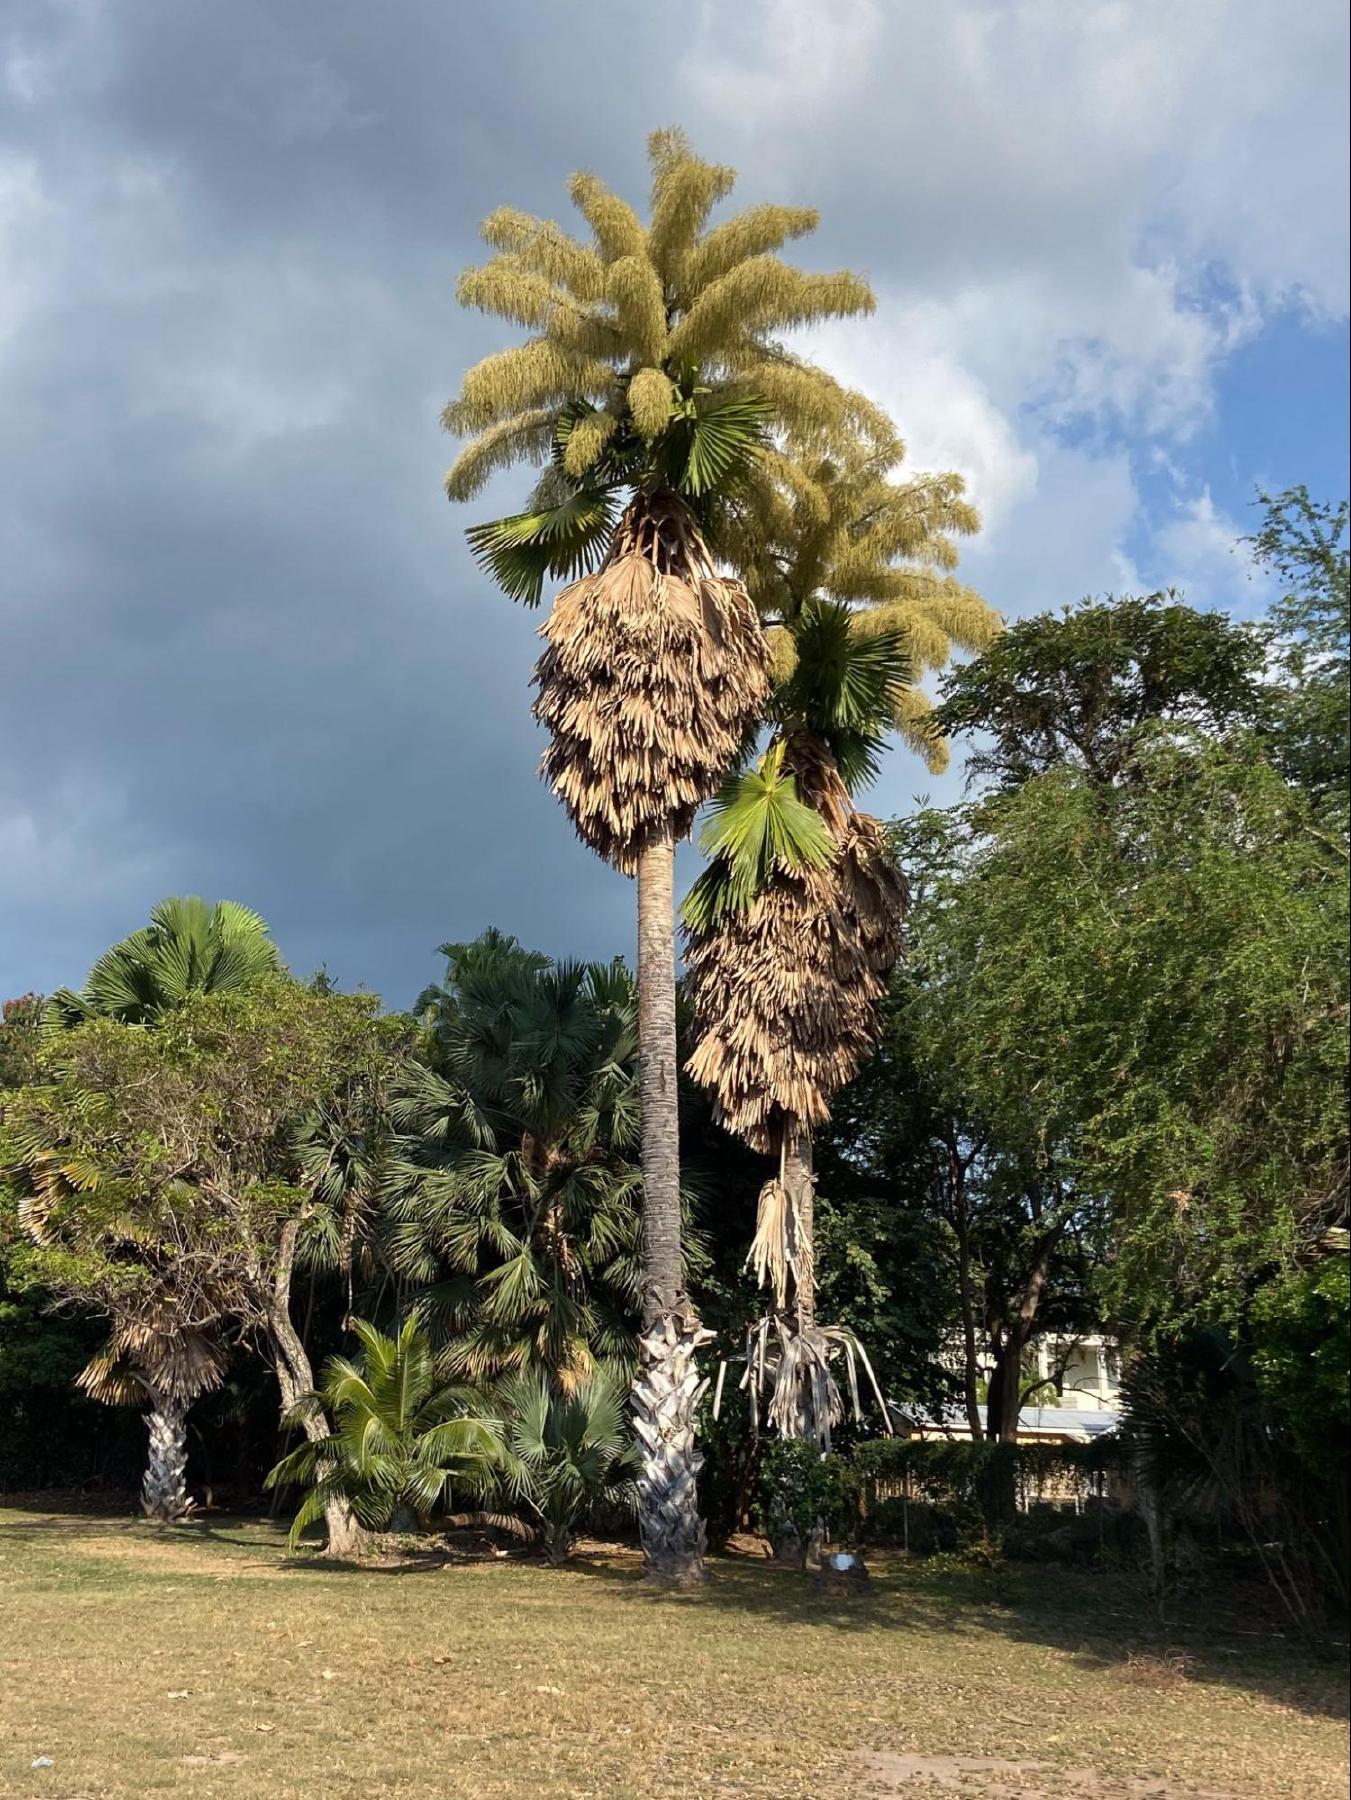 a flowering palm tree, the talipot (century) palm